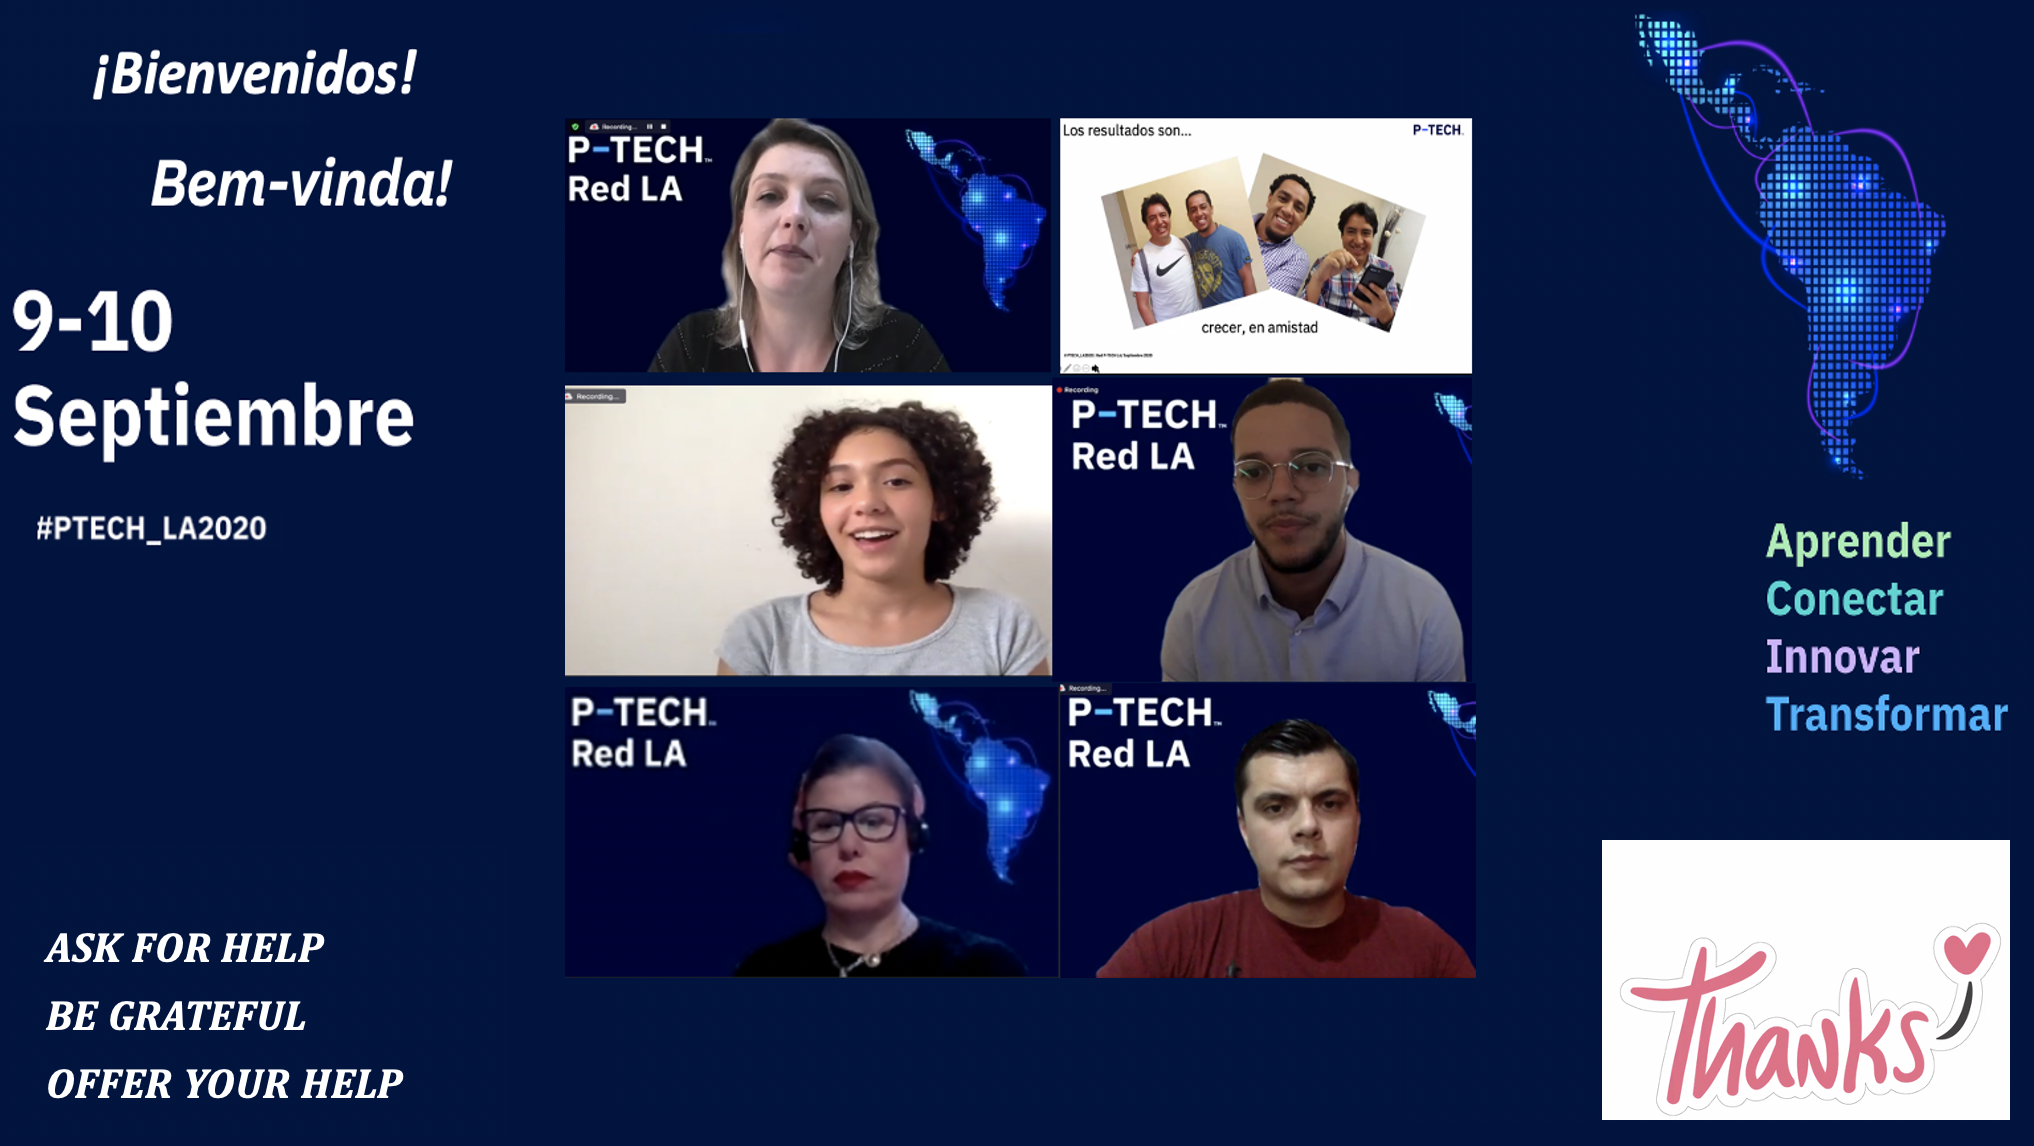 Picture with the color scheme and iconography of the P-TECH LA 2020 virtual event. In the middle, there are photos of the mentors and speakers.